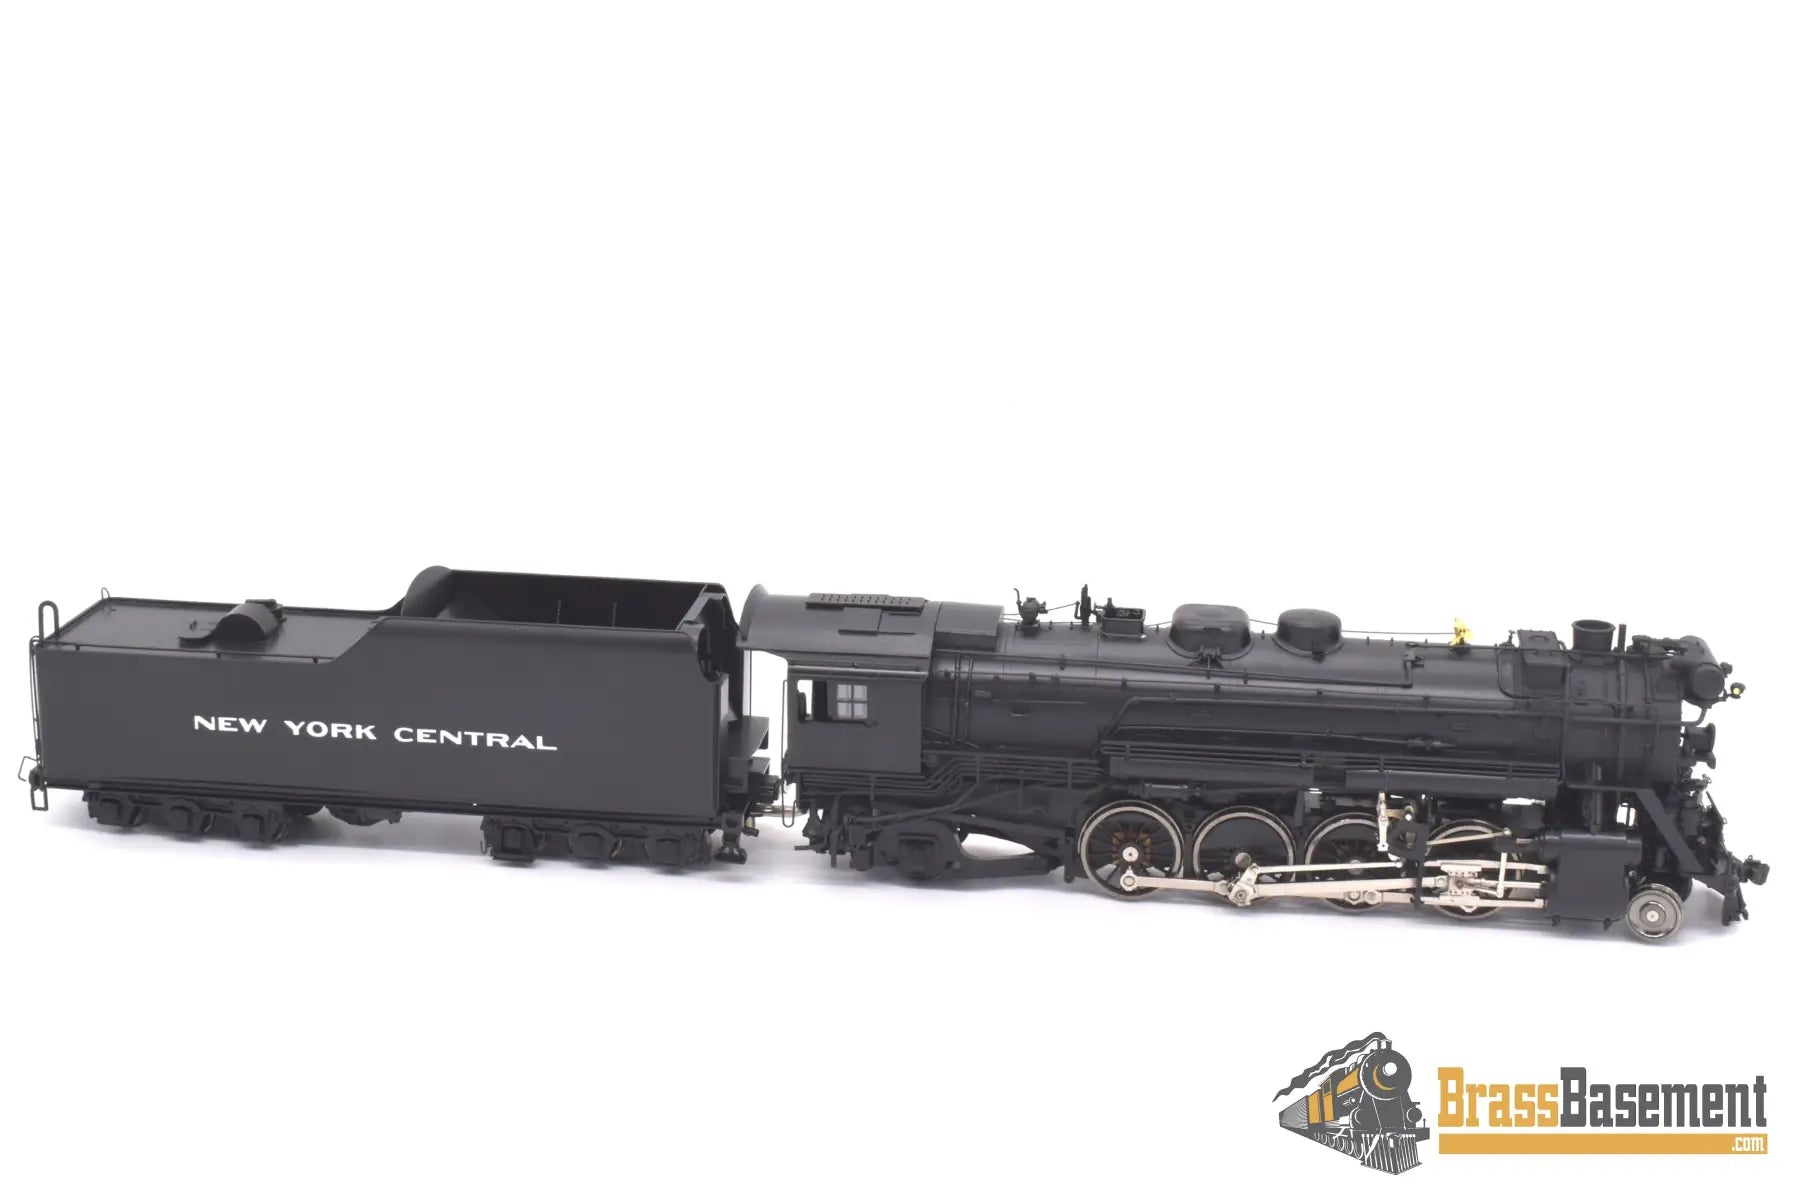 S Brass - River Raisin Models 1726 New York Central 2 - 8 - 2 H - 10B Factory Painted Mint Steam